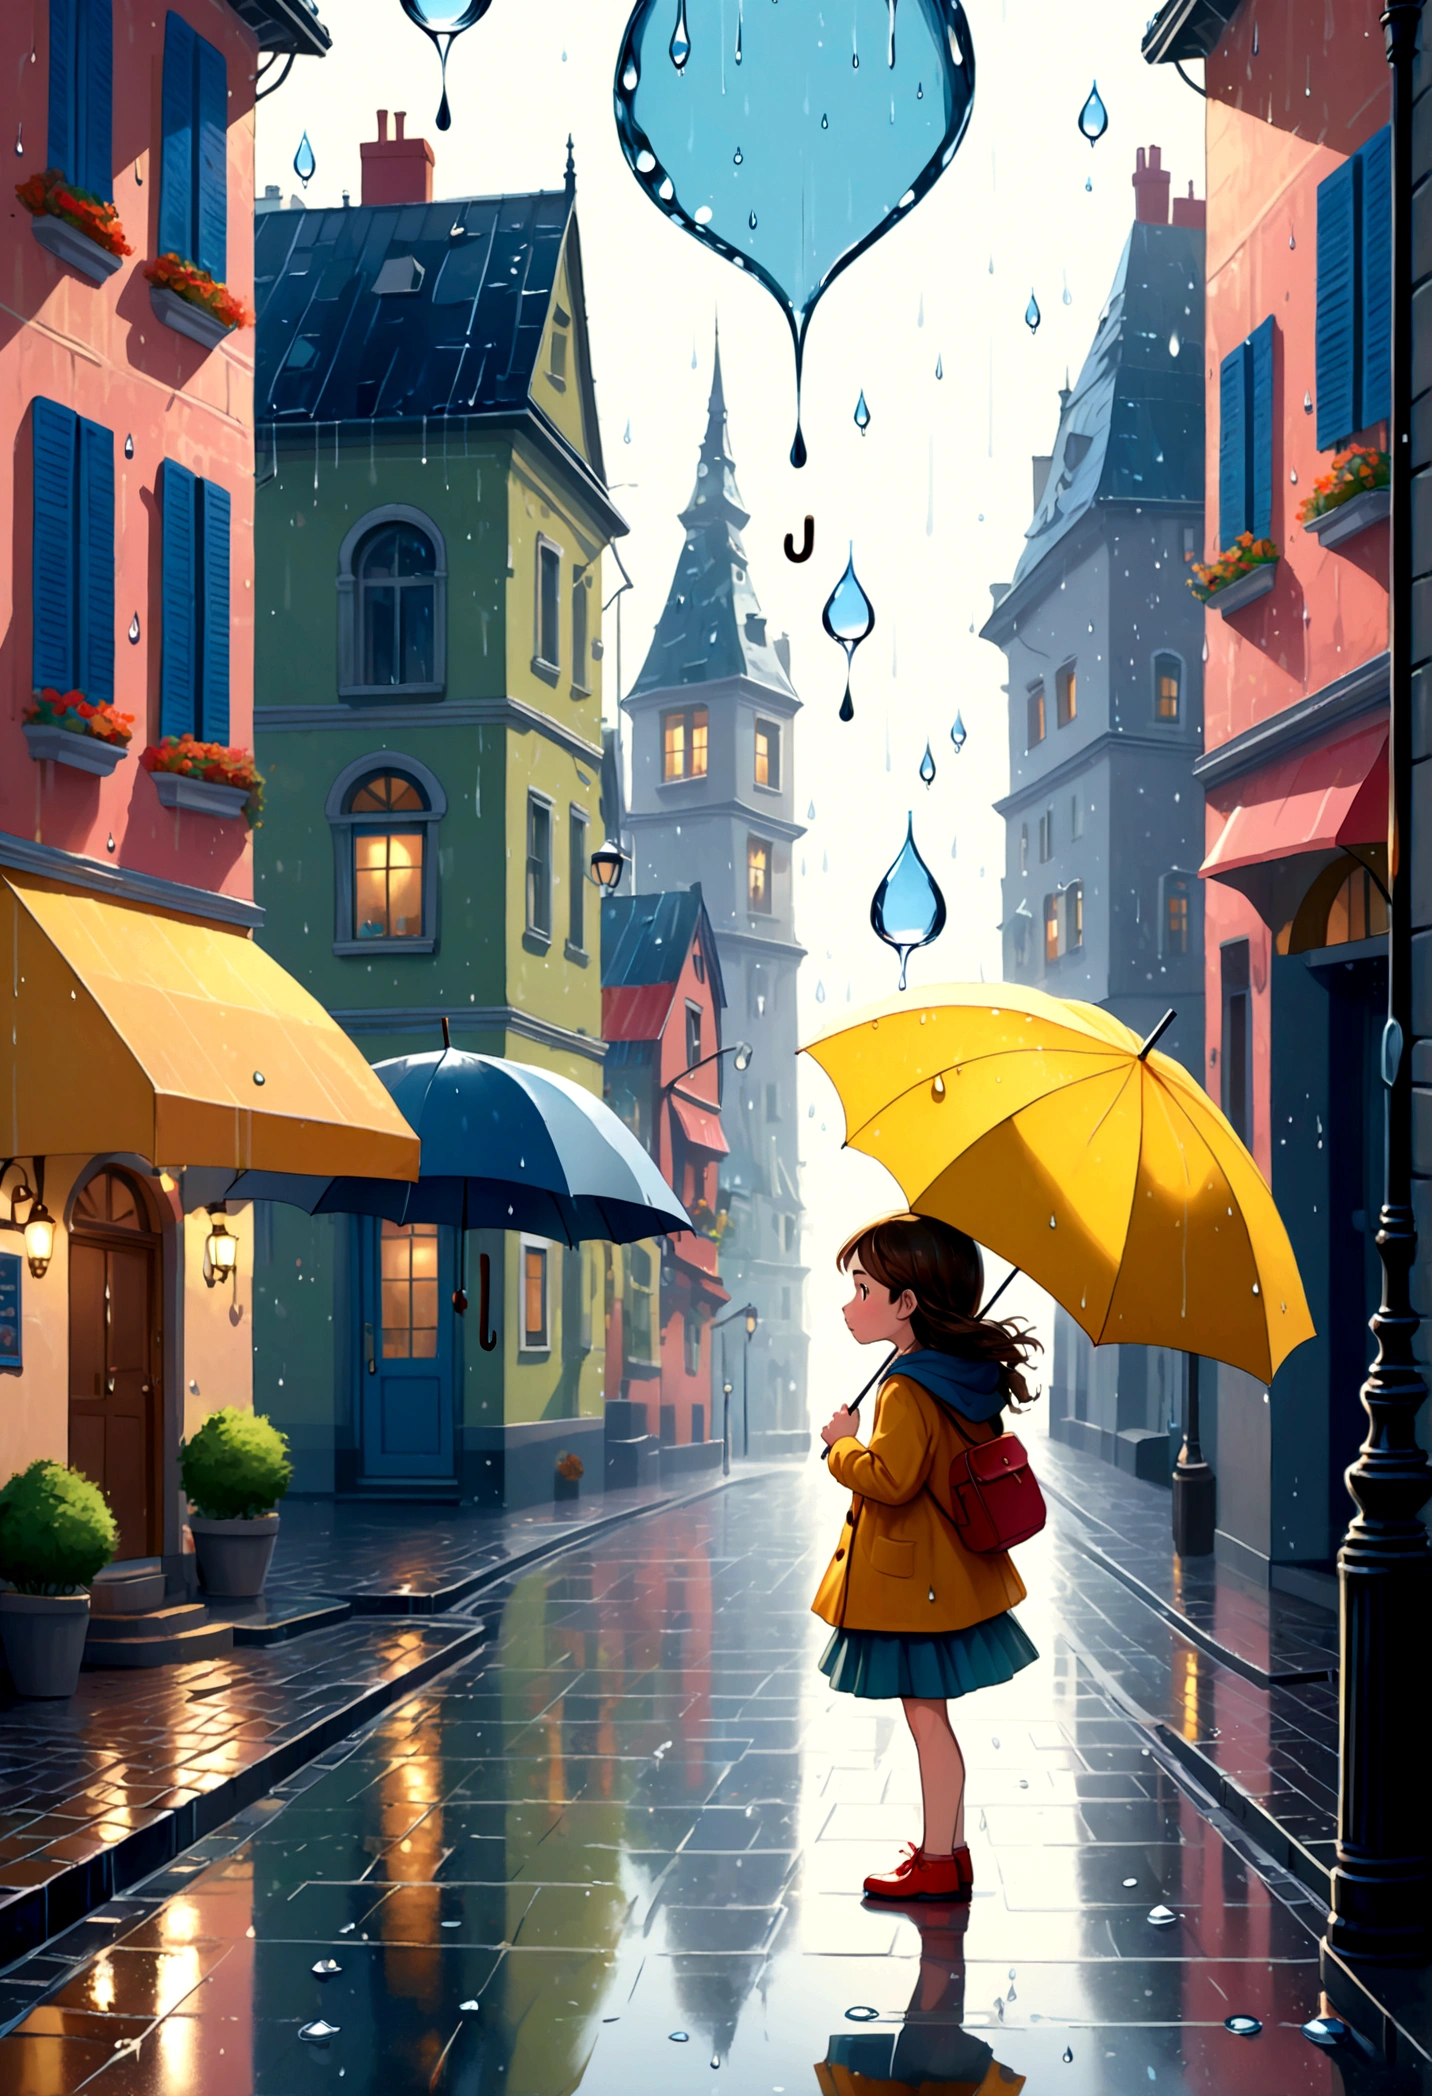 Cute illustration: Landscape,Street corner on a rainy day,A landscape that looks like an illustration from a picture book,Rich in emotion,a girl is walking,BREAK,cute girl with an umbrella,girl details,anatomically correct,BREAK,create an artistic background,Add a drop pattern to the background,The streets are fancy, like a fairy tale,This is a cute illustration like a dream.,Please blur the lines of the droplet pattern to create an artistic expression.,Intricate details,Wide range of colors,artwork,rendering,(masterpiece:1.3),(highest quality:1.4),(Super detailed:1.5),High resolution,Very detailed,unity 8k wallpaper,structurally correct